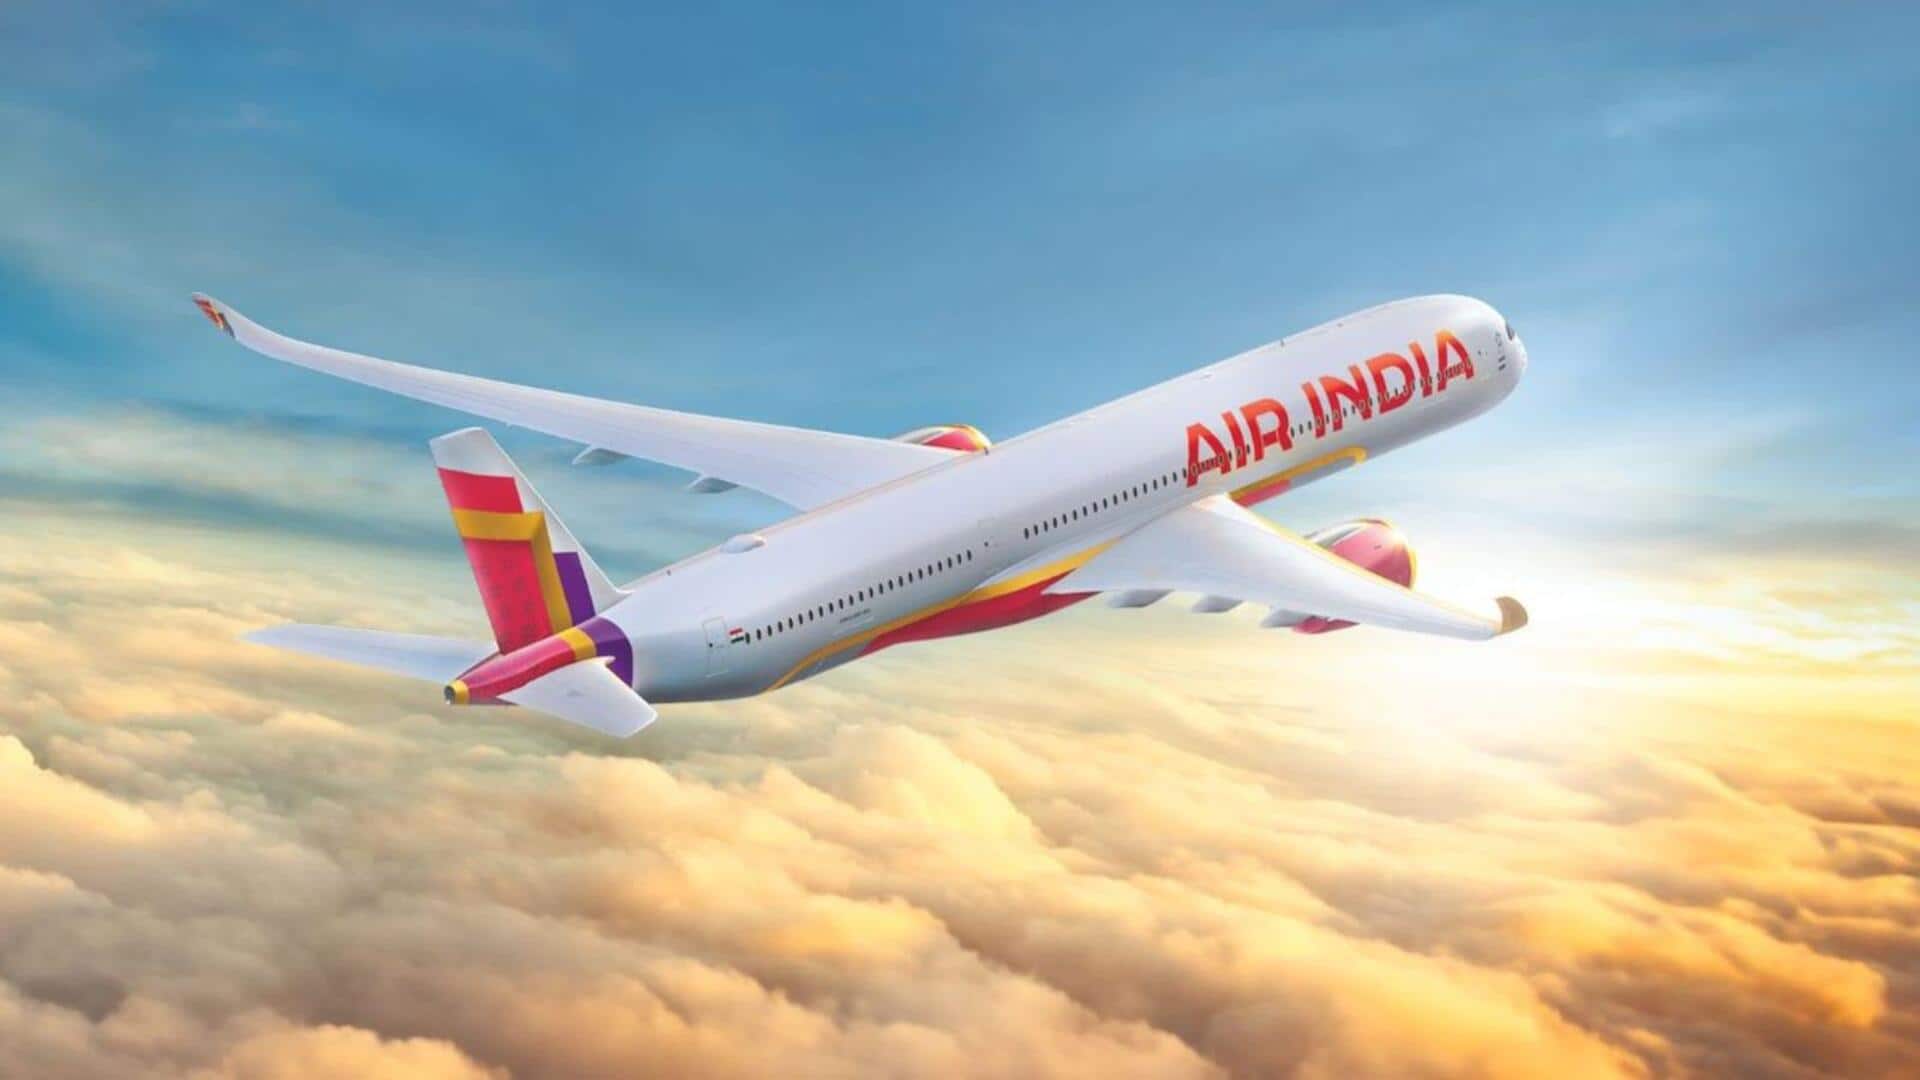 Air India announces special business class fares on select routes